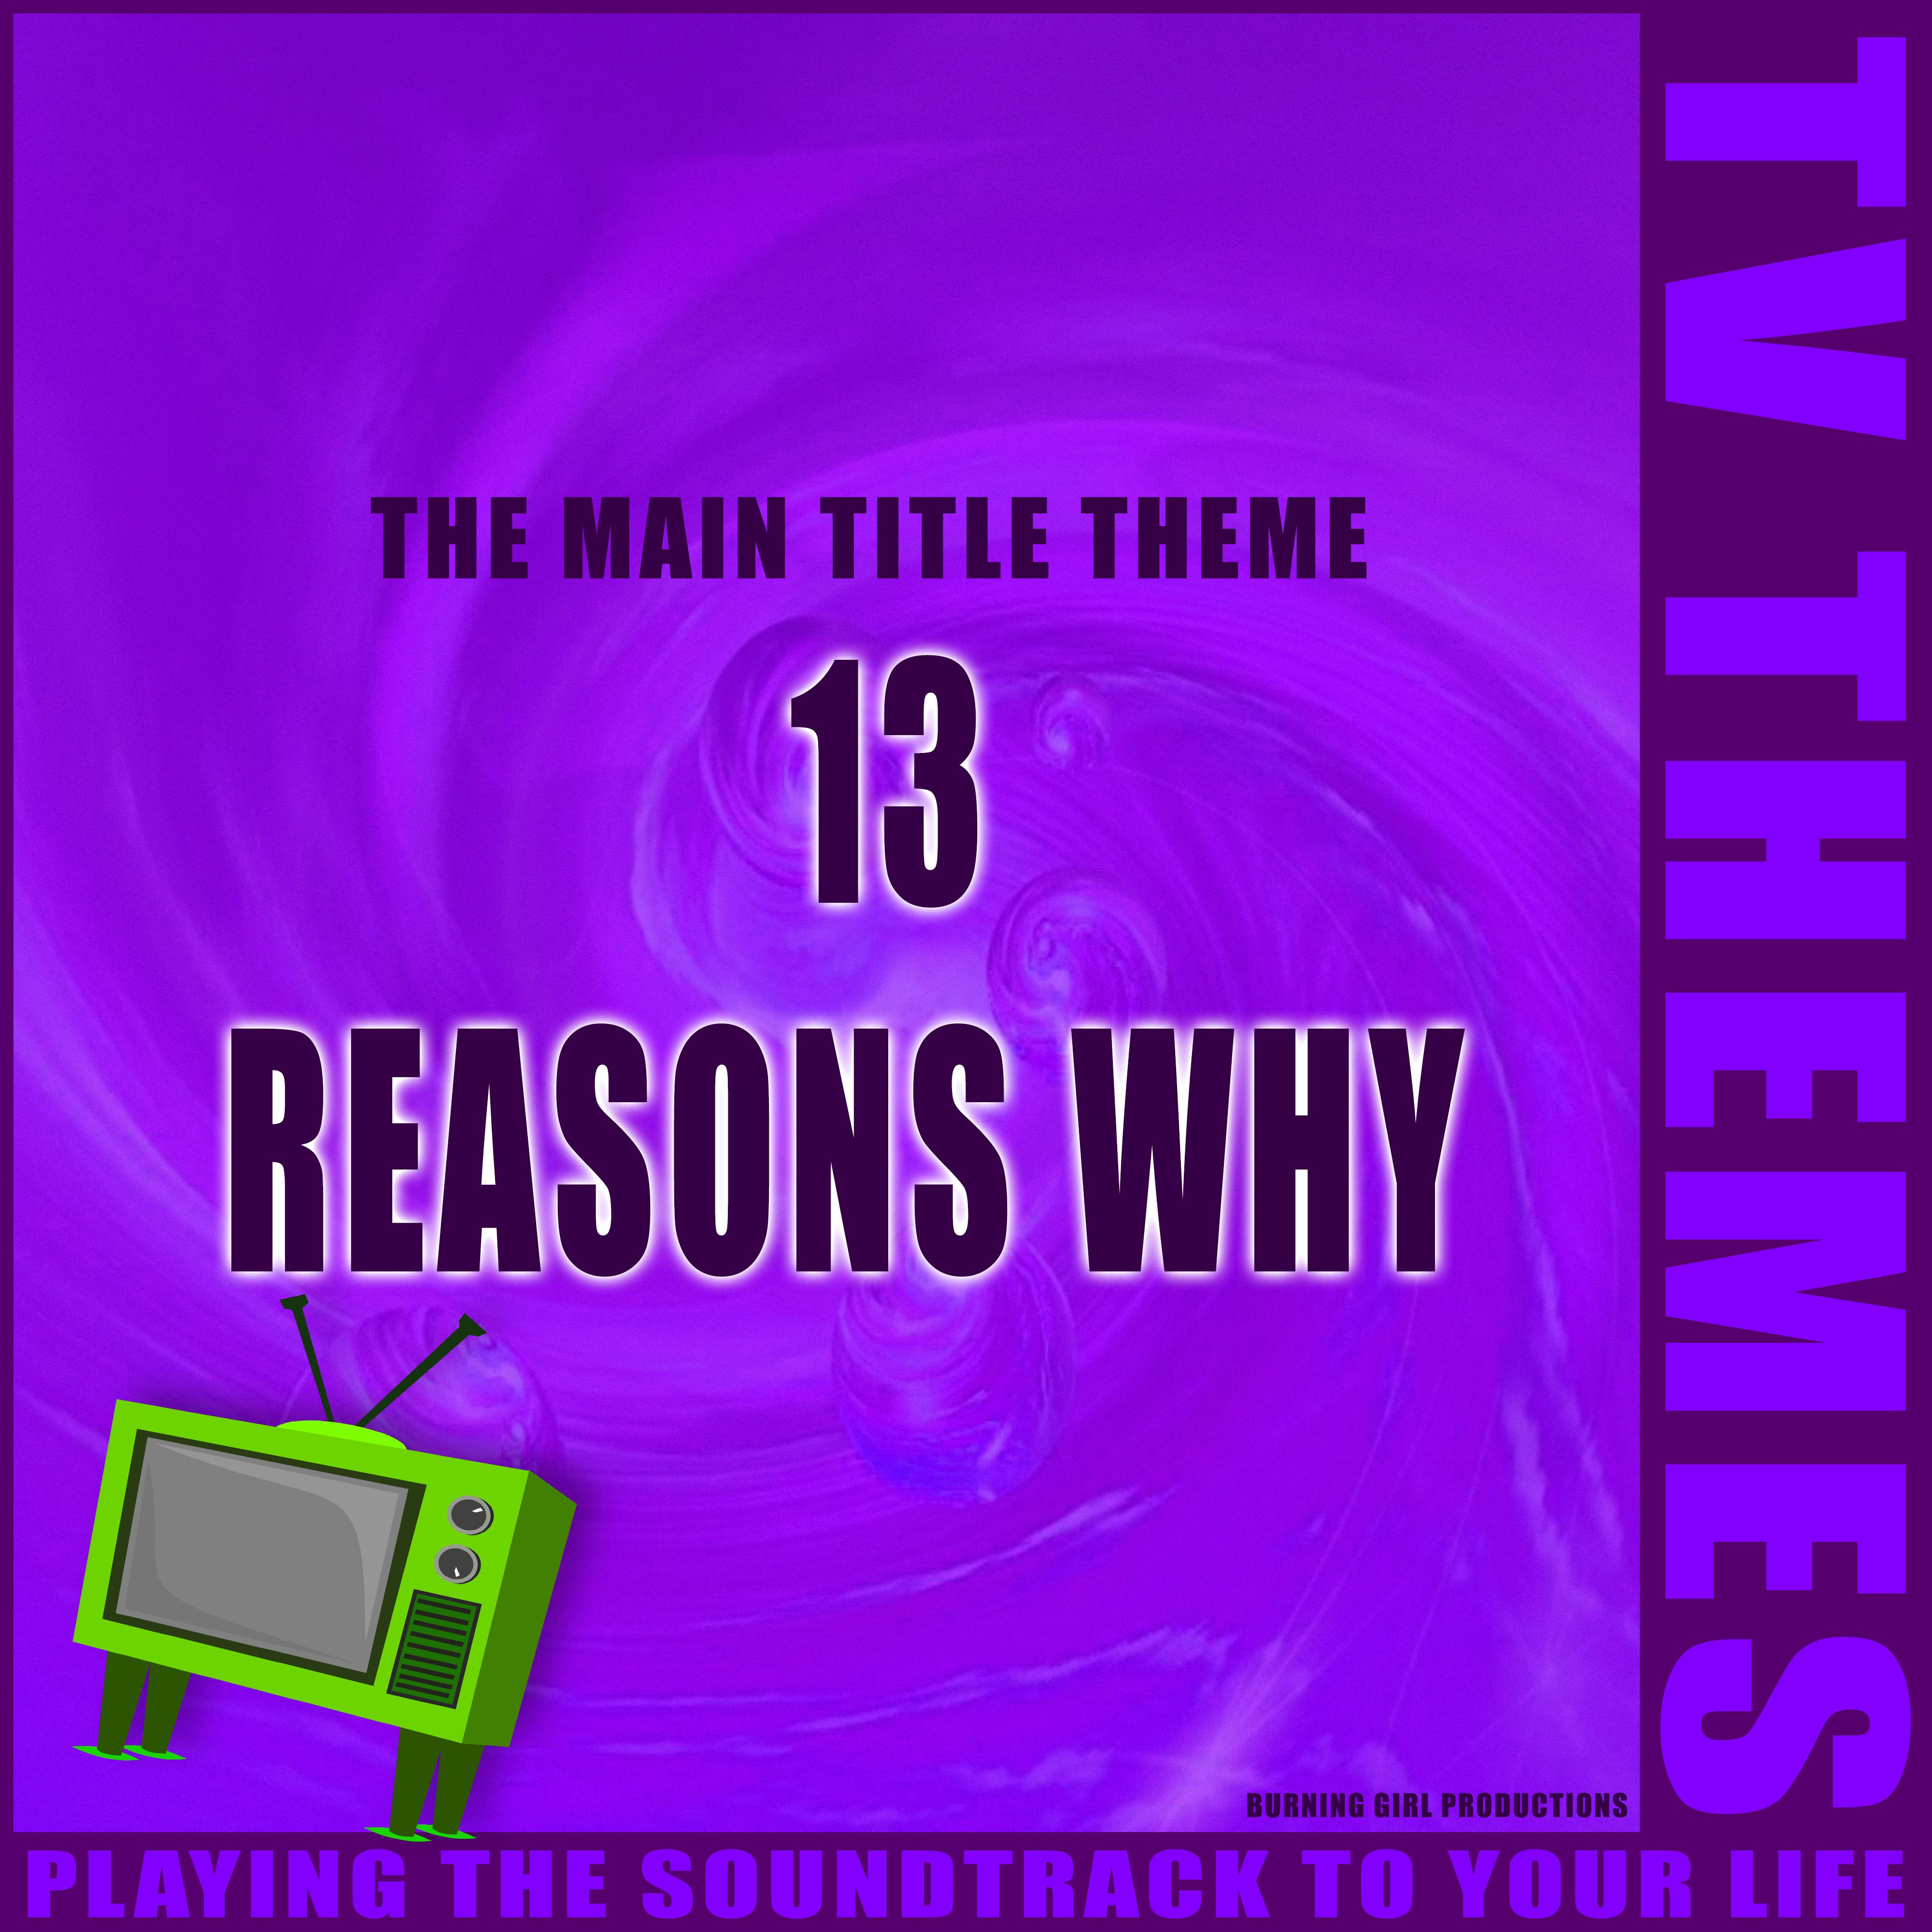 The Main Title Theme - 13 Reasons Why